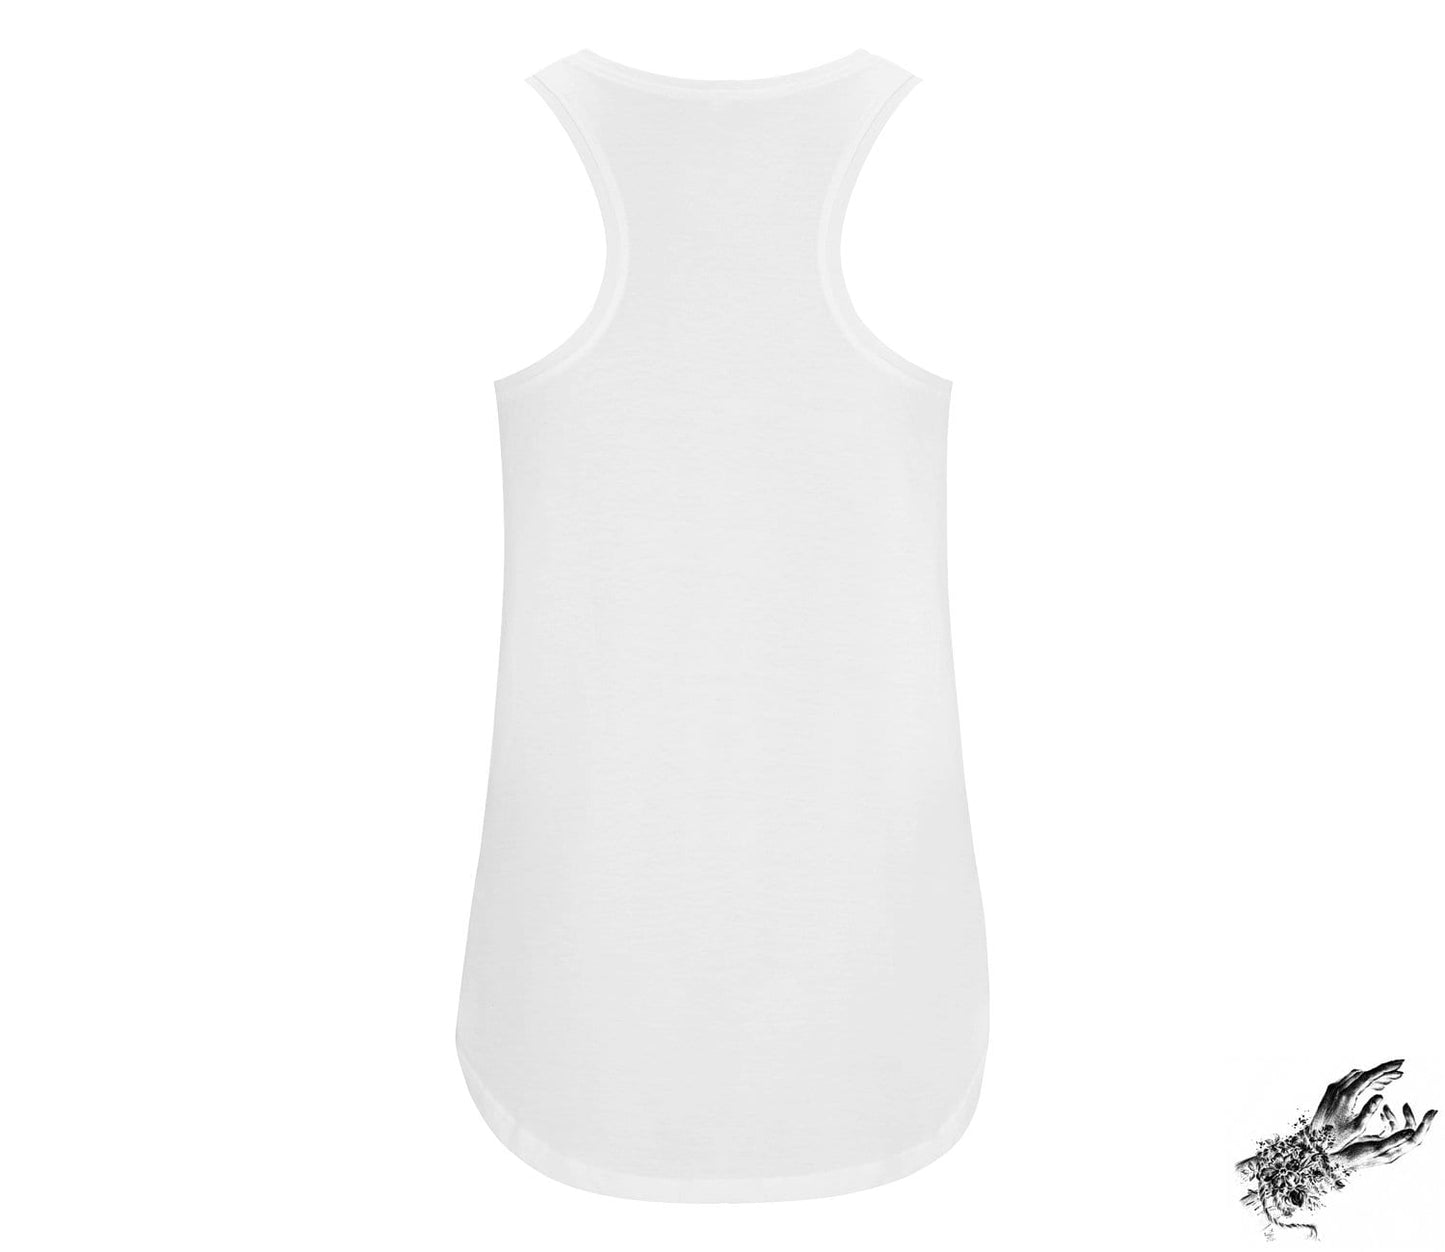 White Occult Hand Print Racerback Tank Top